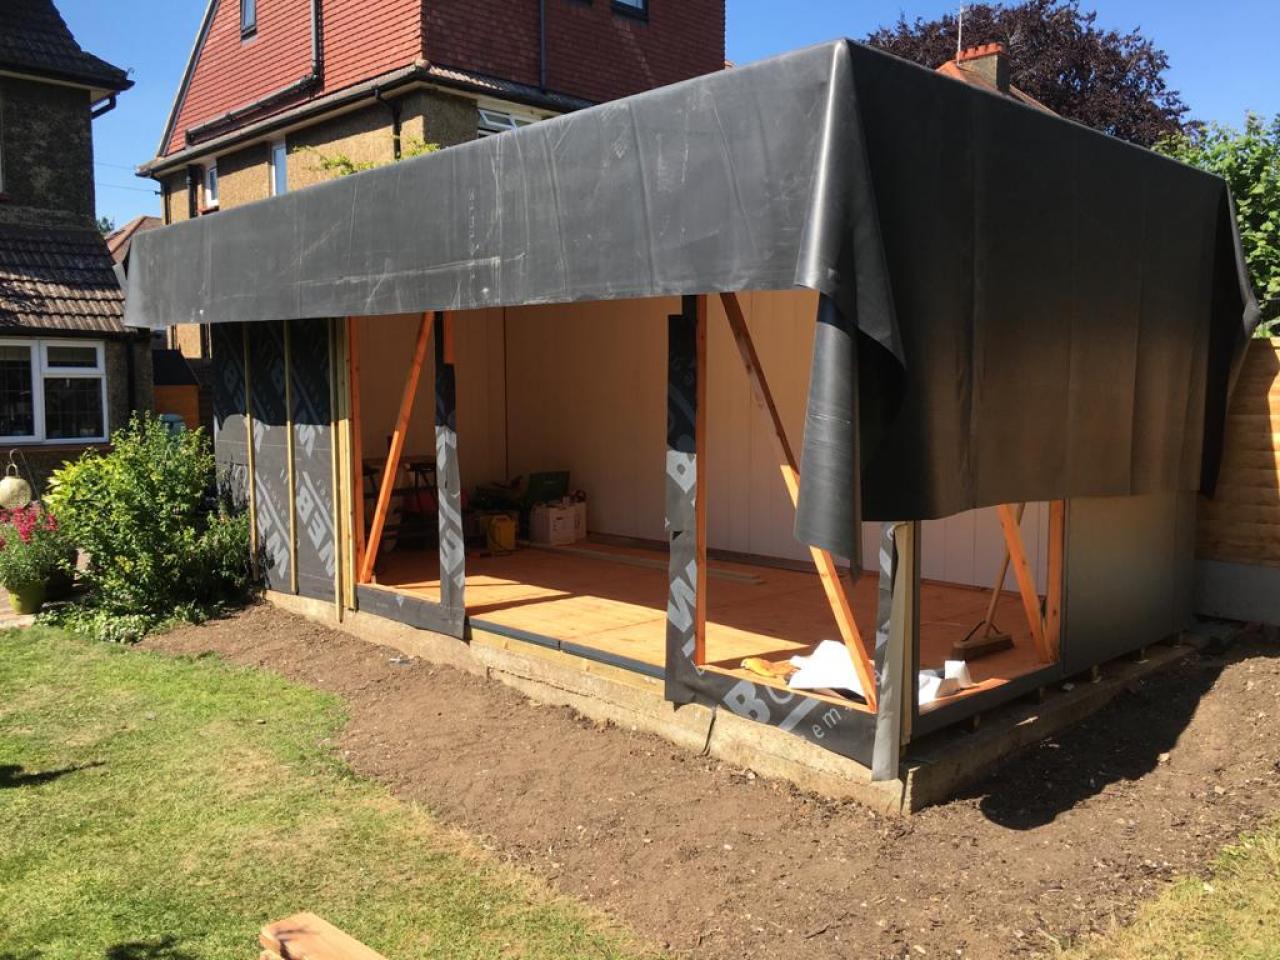 This was the first building delivered by us that used the popular option of cedar cladding. 

They wanted to enjoy the benefits of our modern construction techniques but still want a traditional look for their garden rooms. 
